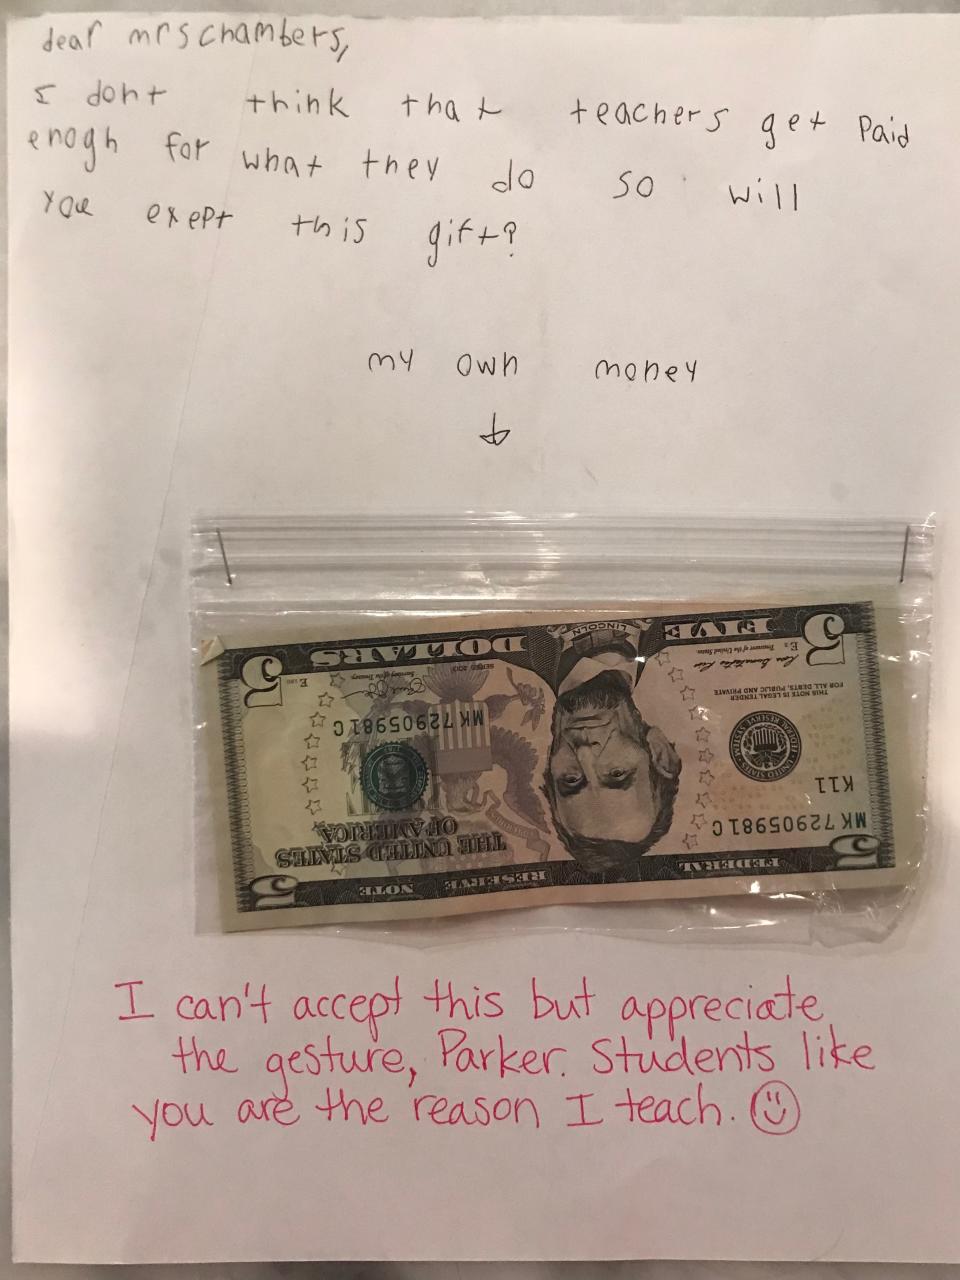 Parker Williams, a 3rd-grader in Florida, loves his teacher so much, he gave her a pay raise. (Photo: Courtesy of Jennifer Williams)